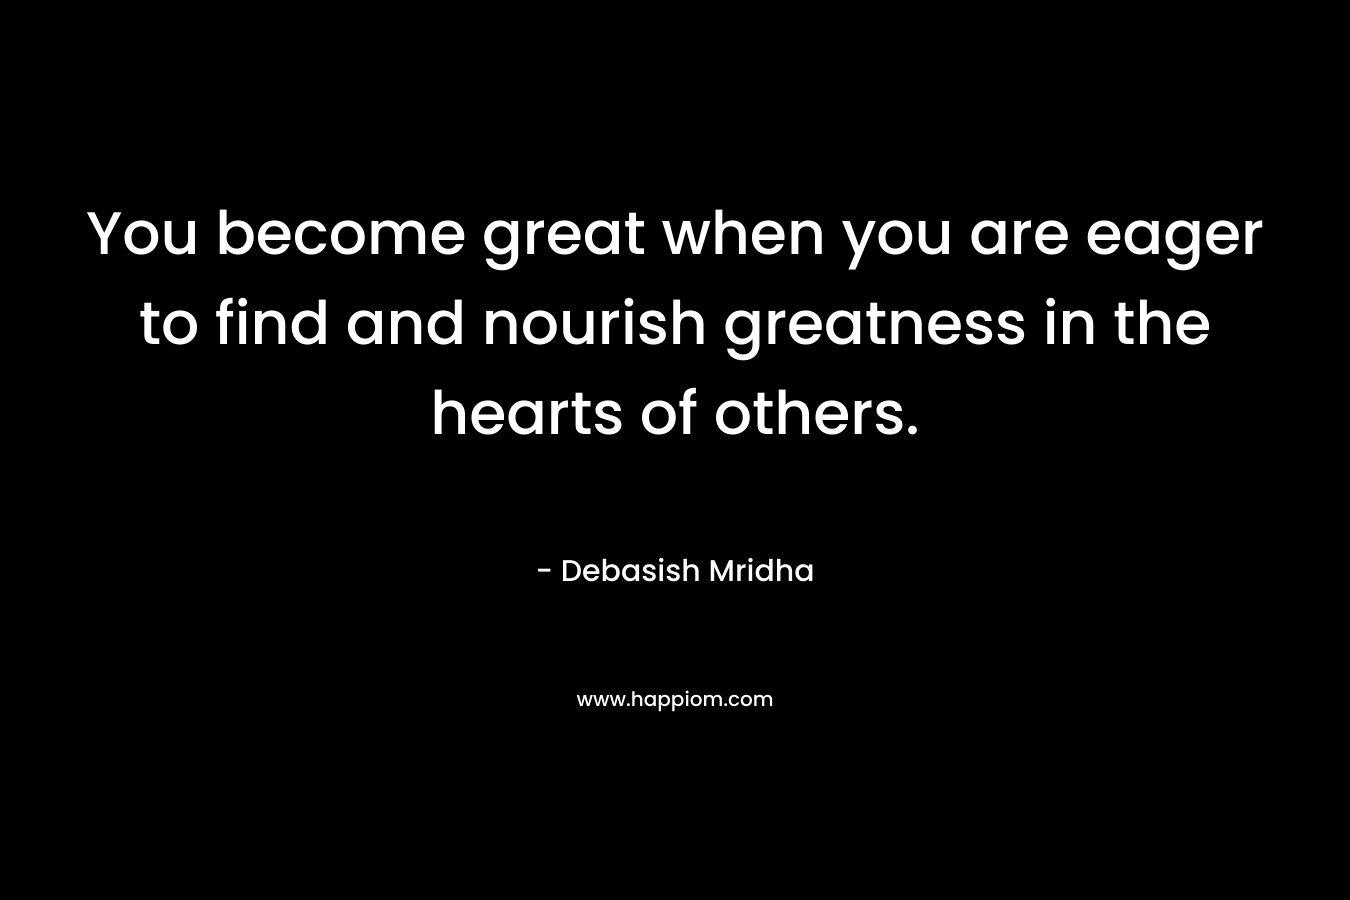 You become great when you are eager to find and nourish greatness in the hearts of others.